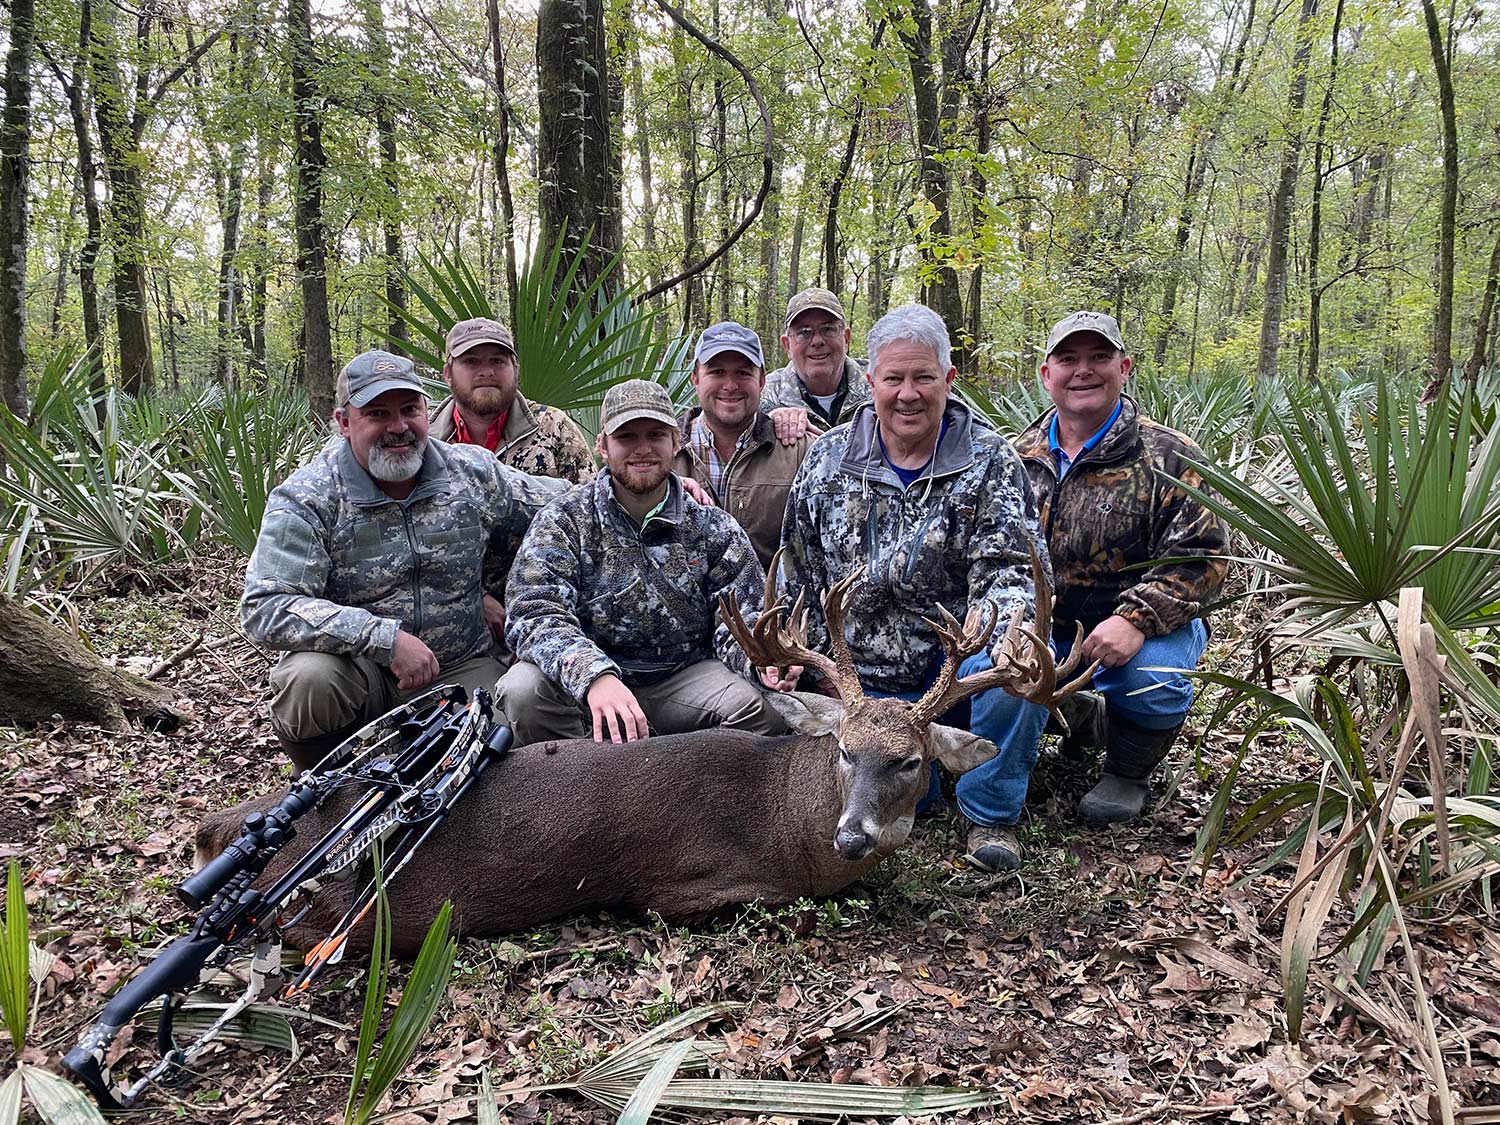 A group of hunters kneel behind a whitetail buck.